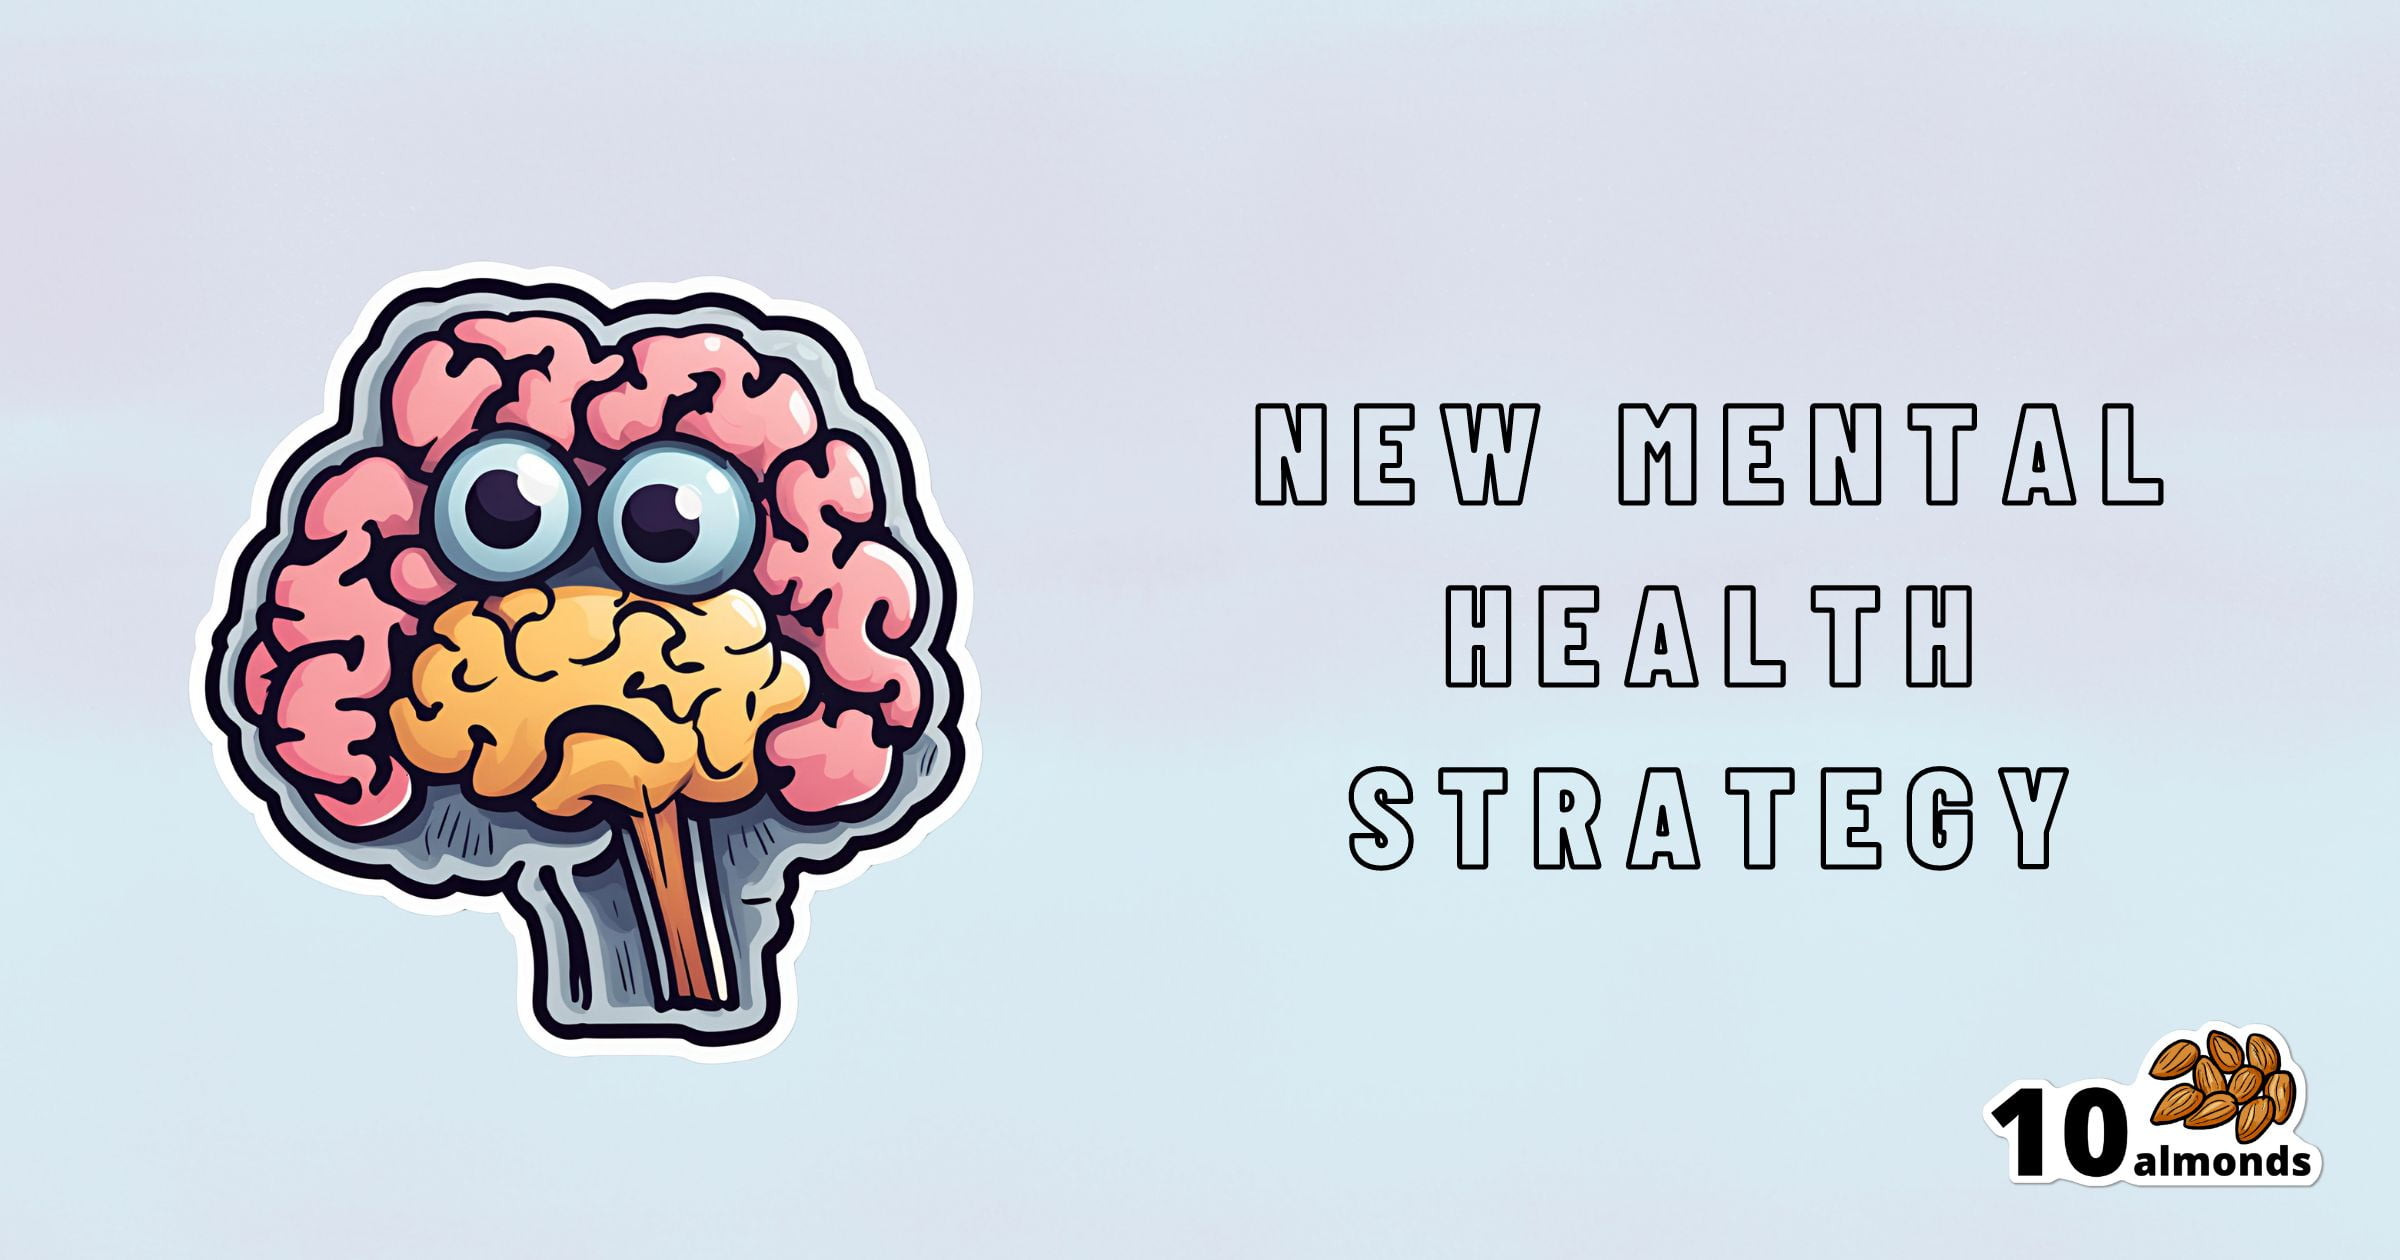 A digital illustration of a brain with eyes and a concerned expression holding a wooden stick in its mouth on the left. To the right, text reads "New Mental Health Strategy," reflecting insights from the Federal Panel. The bottom right corner has a logo with "10 almonds" and an image of almonds.